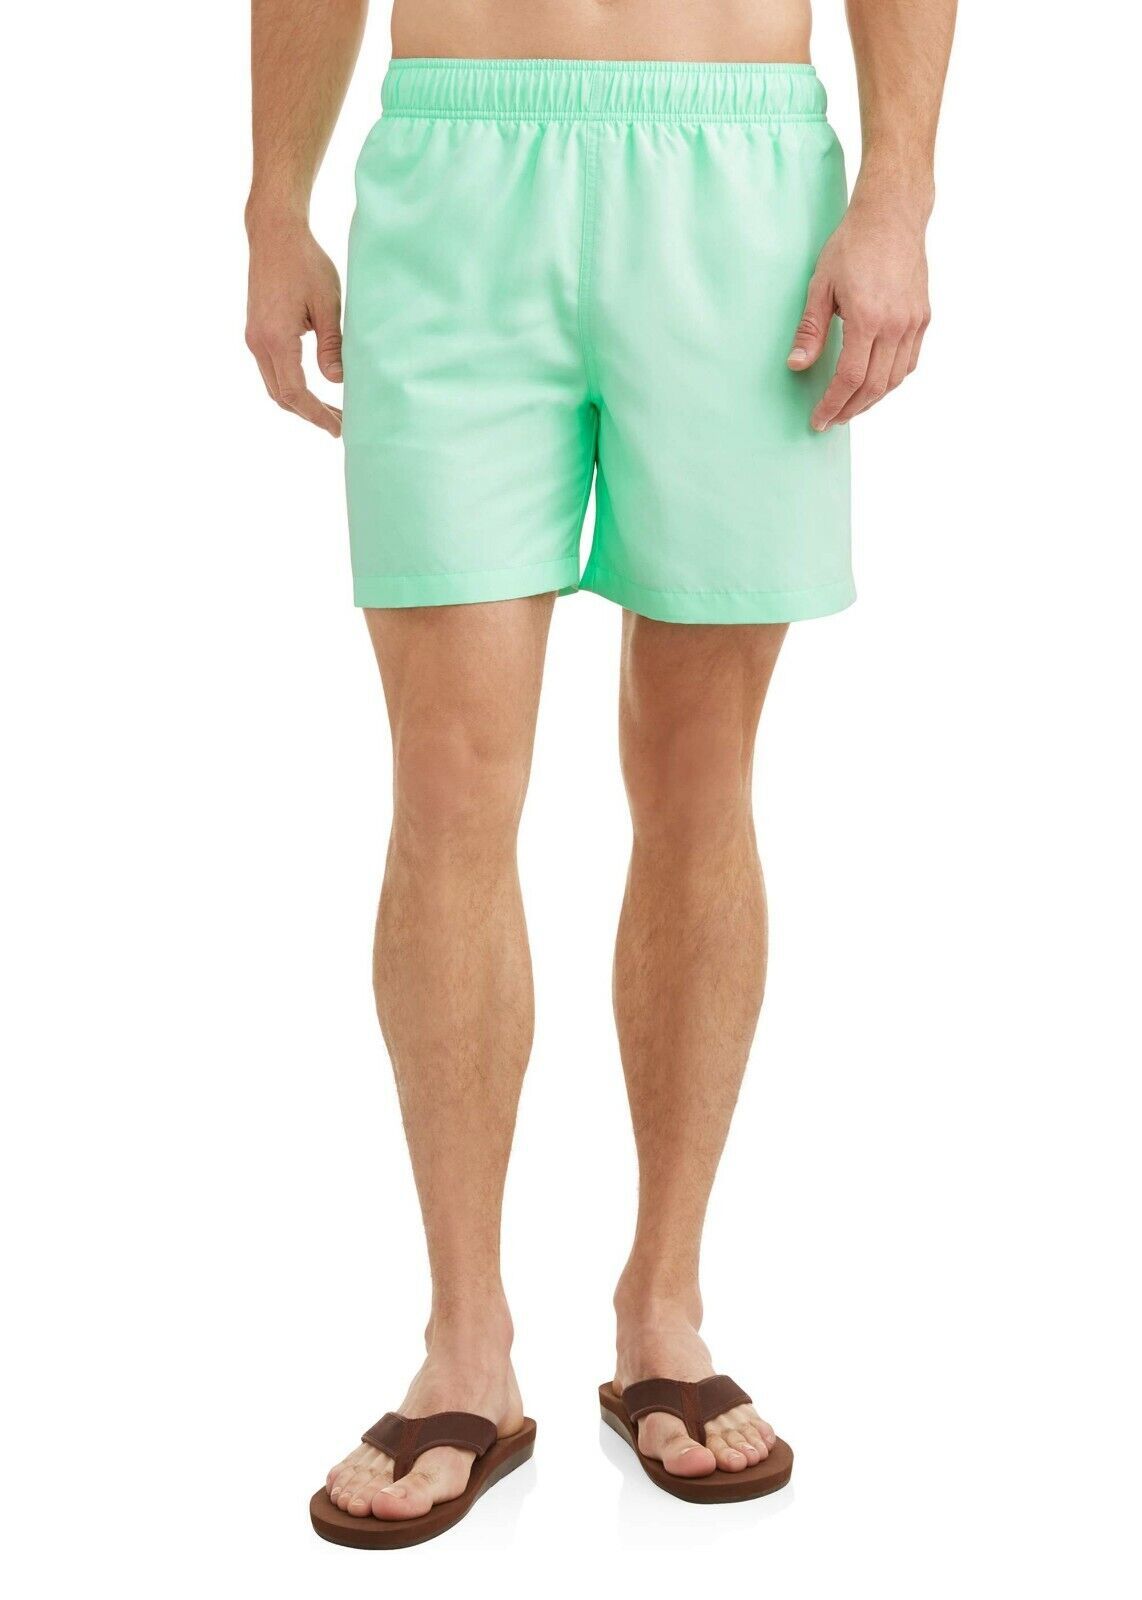 Primary image for George Men's Swim Trunks Shorts Size 3XL 48-50 Agua Verde 6" Inseam Above Knee